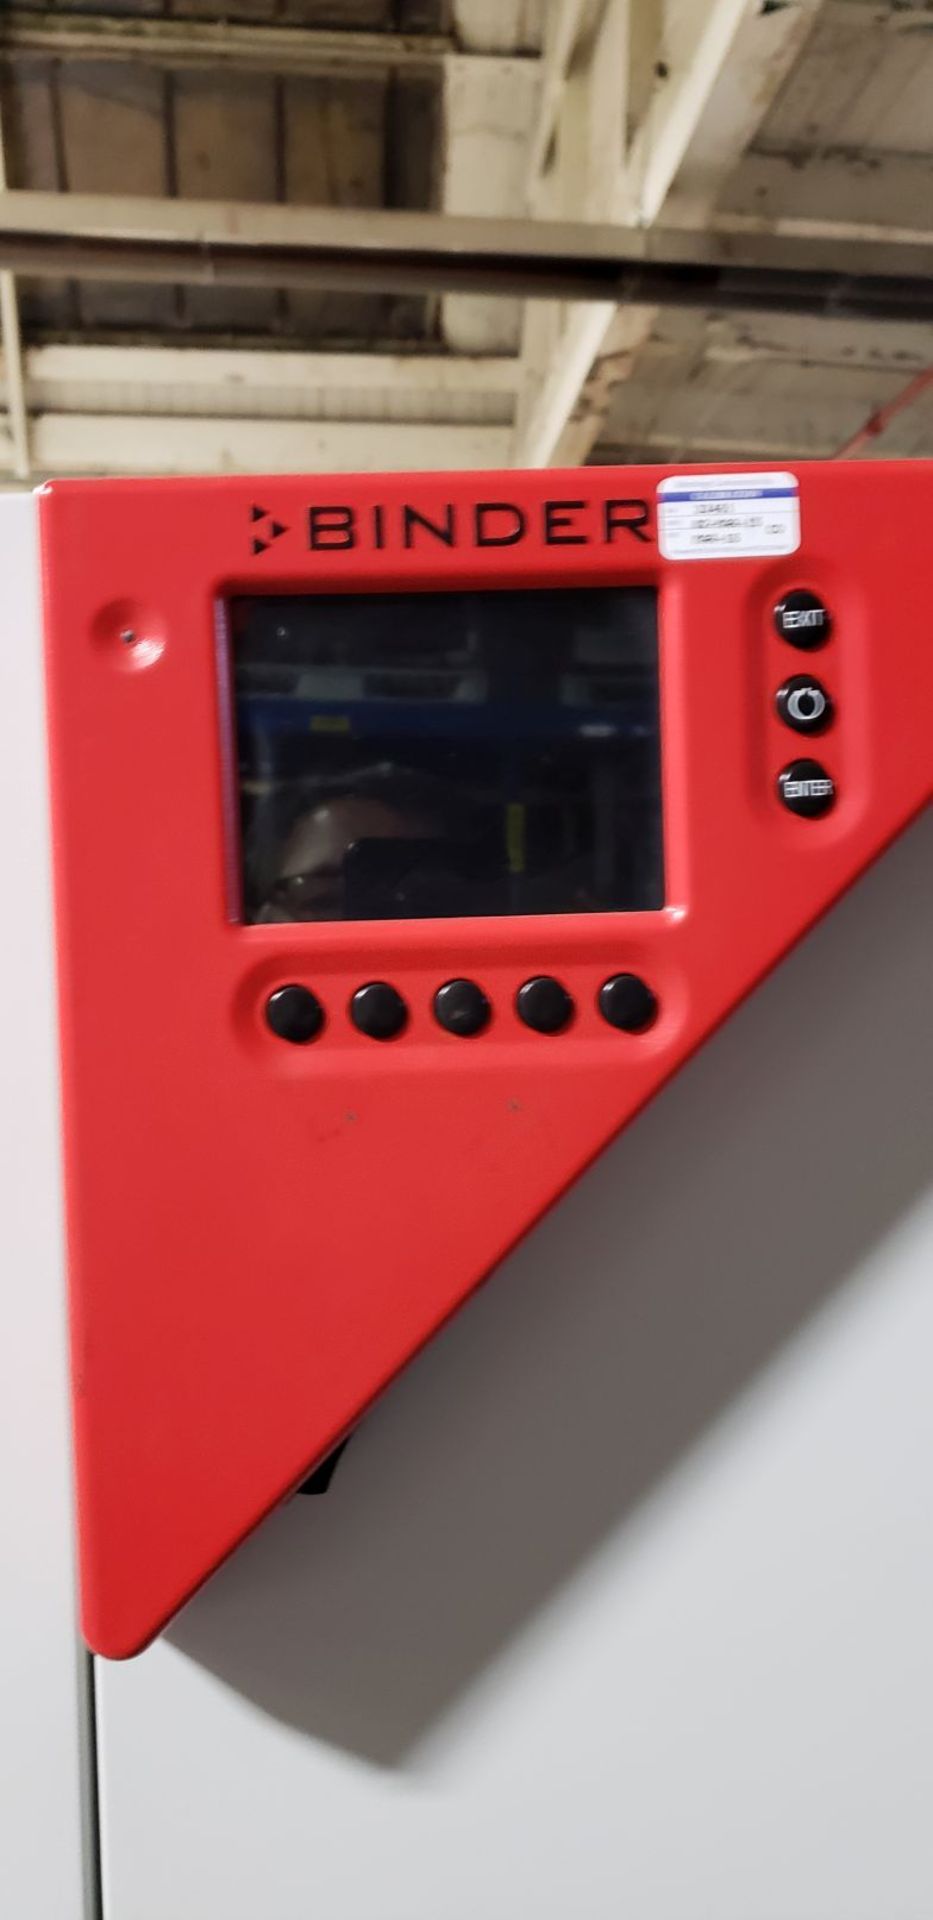 Binder Constant Climate Chamber Model KBF-720 - Image 9 of 9